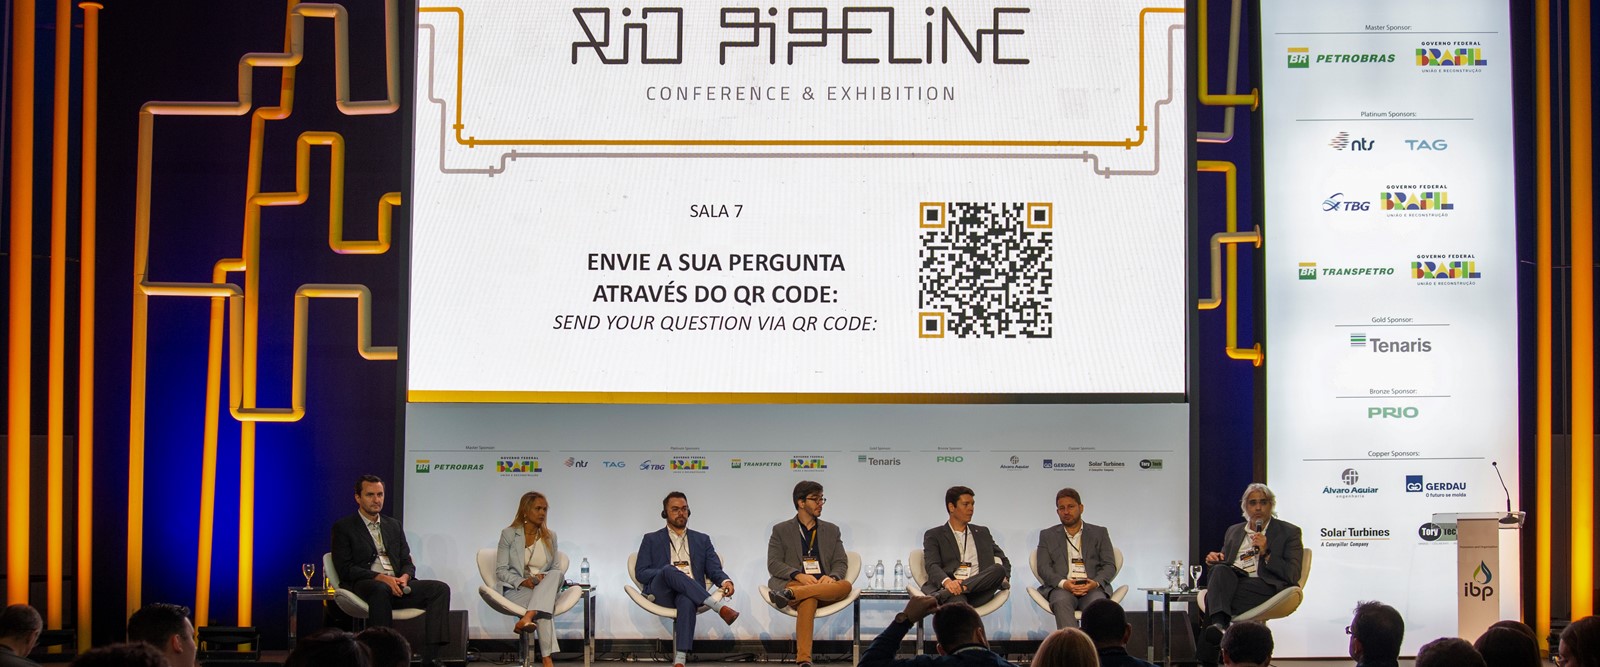 Operational safety and efficiency success experiences are highlights of Rio Pipeline